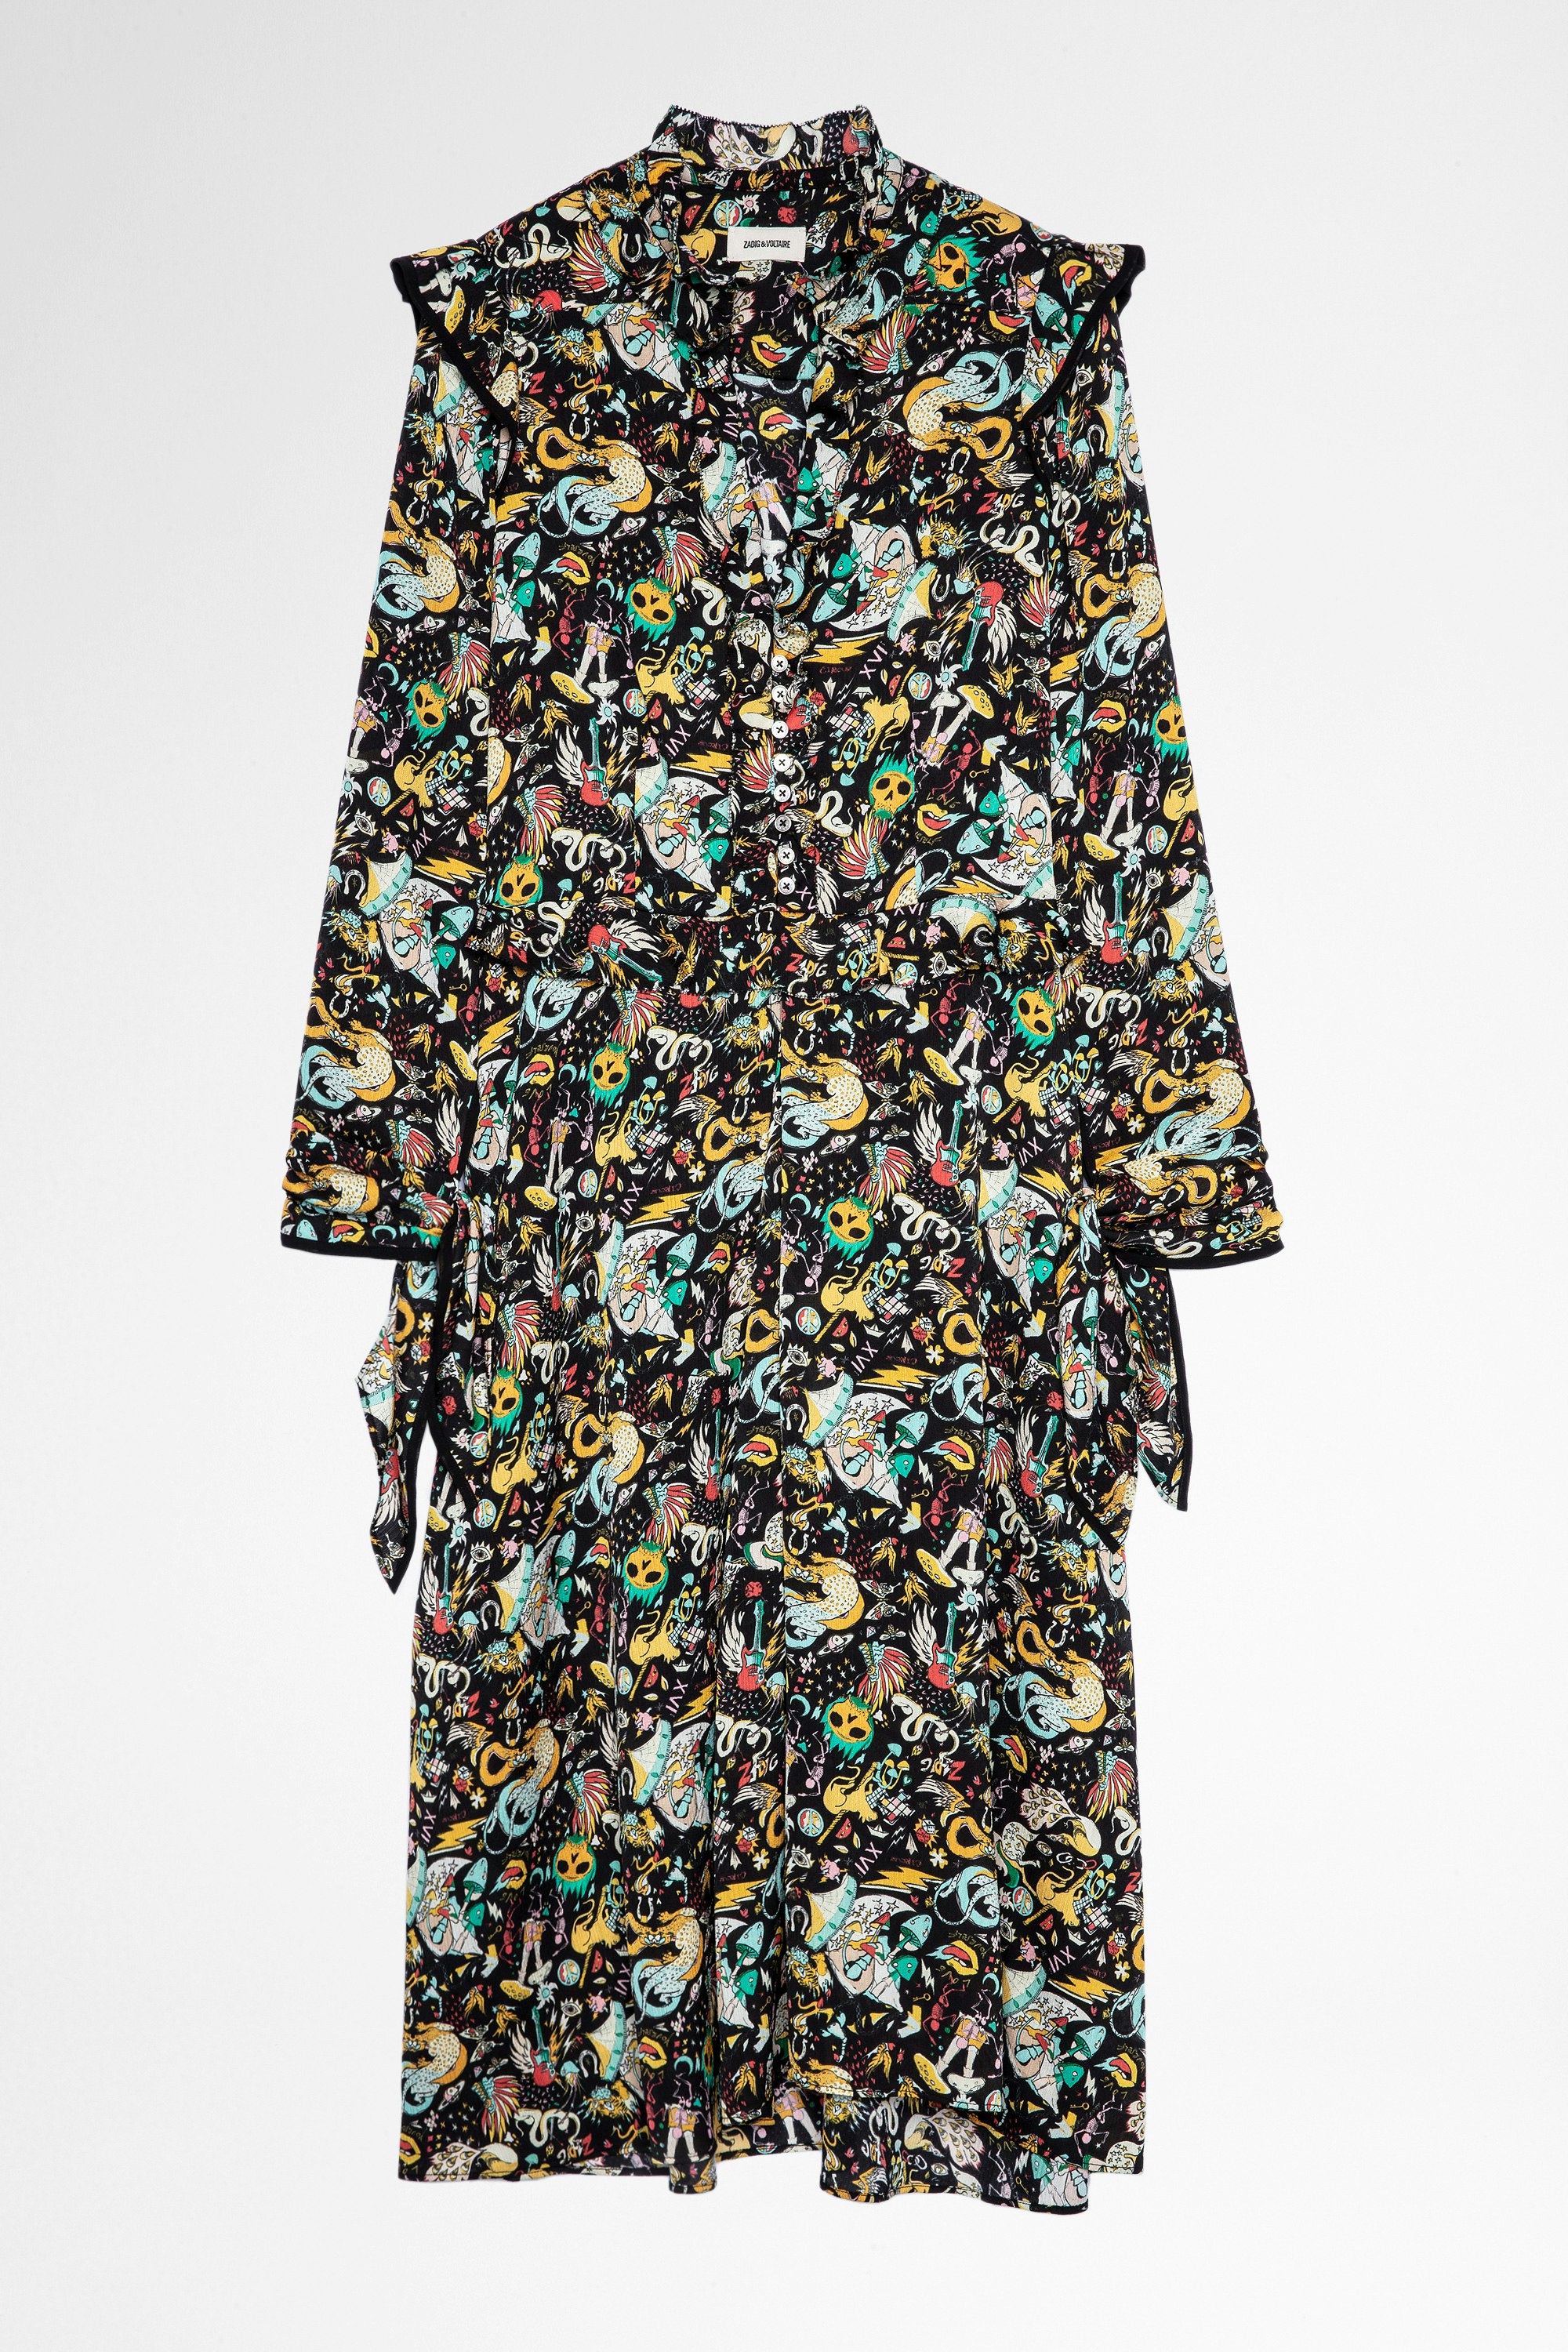 Rosier ドレス Women's mid-length black dress with colorful circus print. Made with recycled fibers